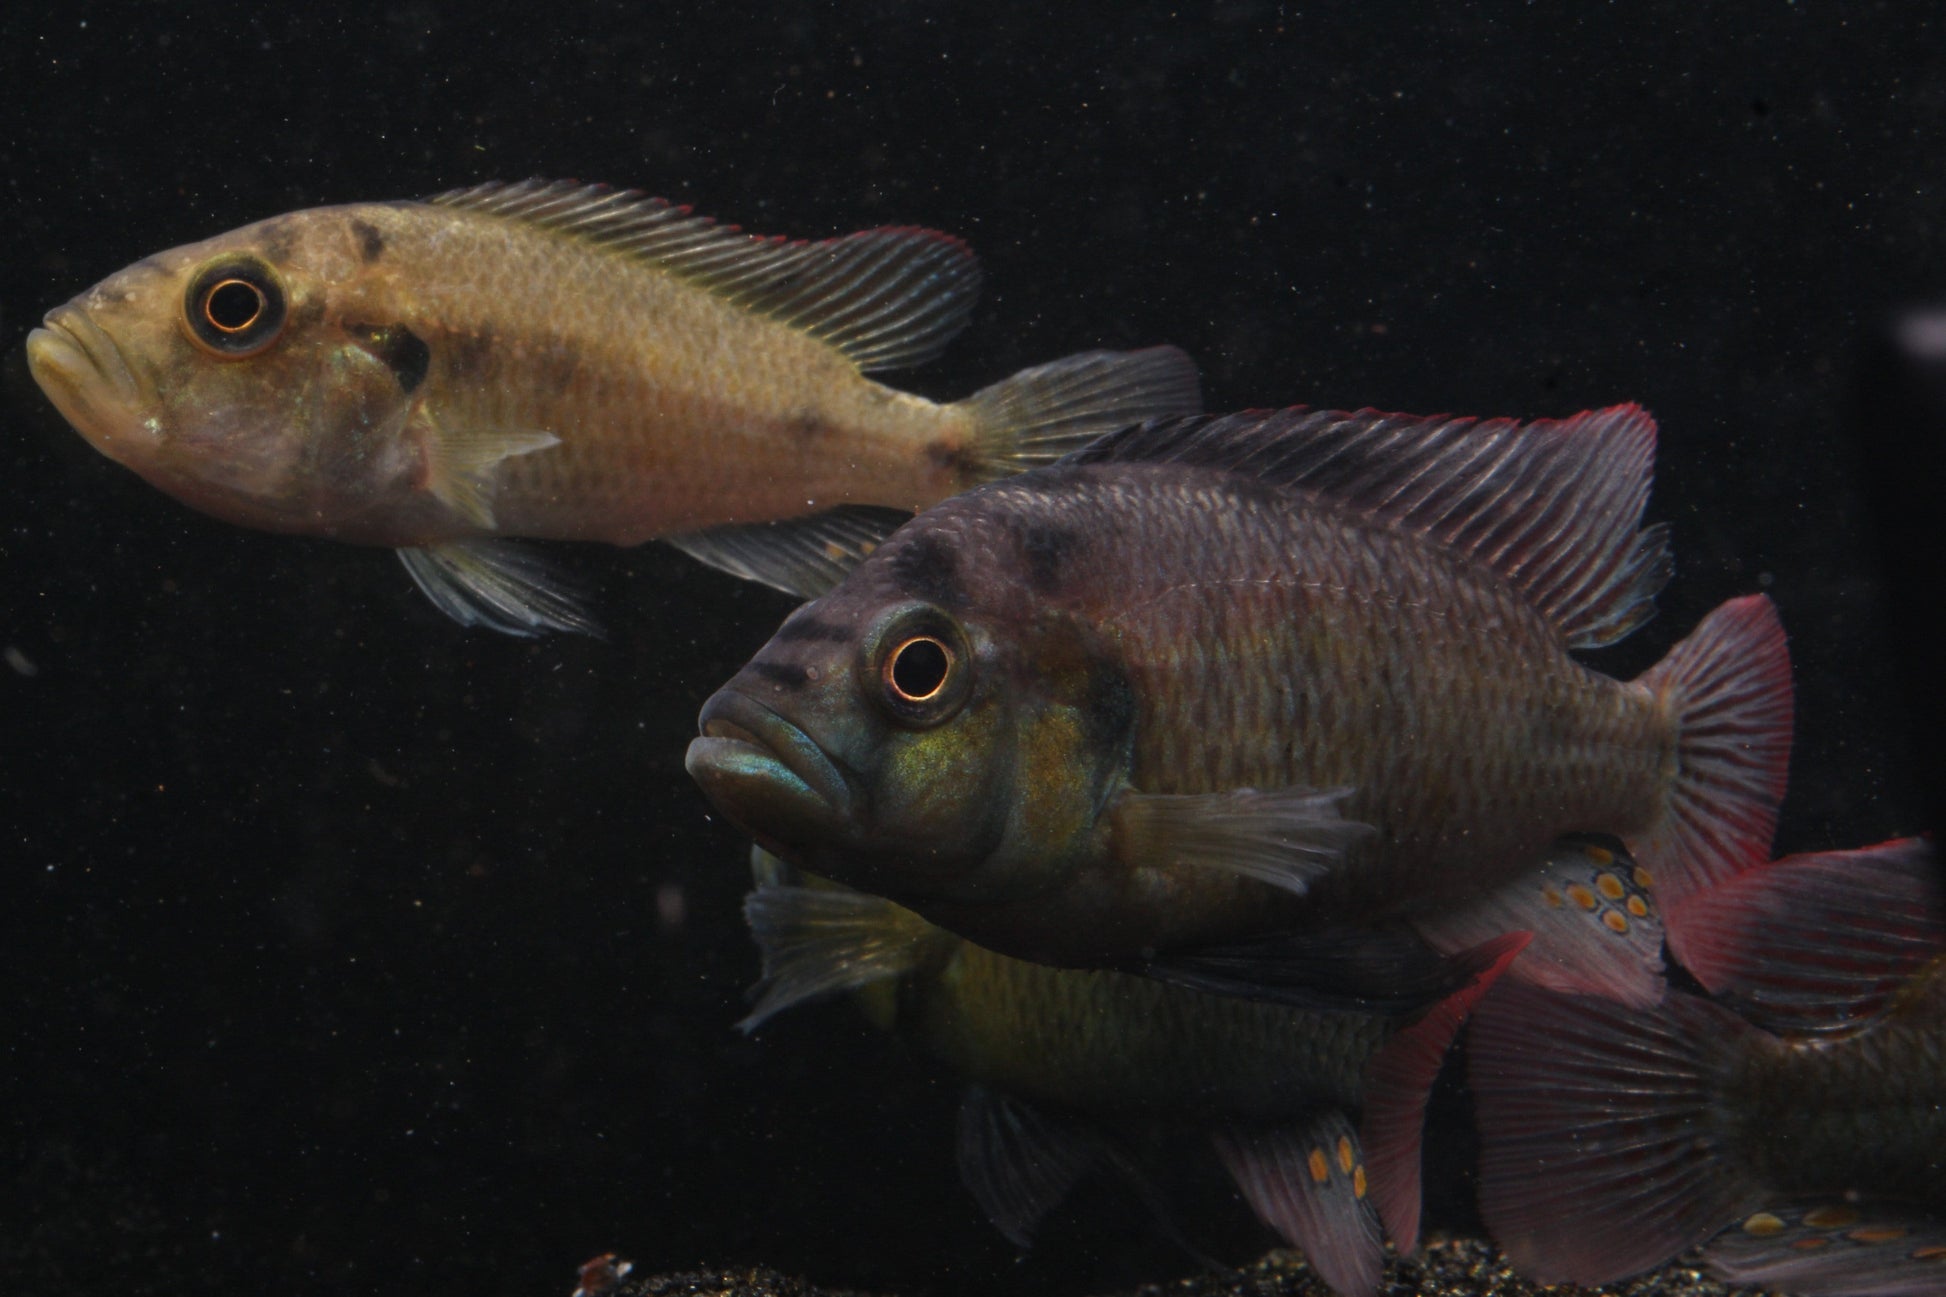 Yellow Belly Hap (Astatotilapia aeneocolor) - Imperial Tropicals